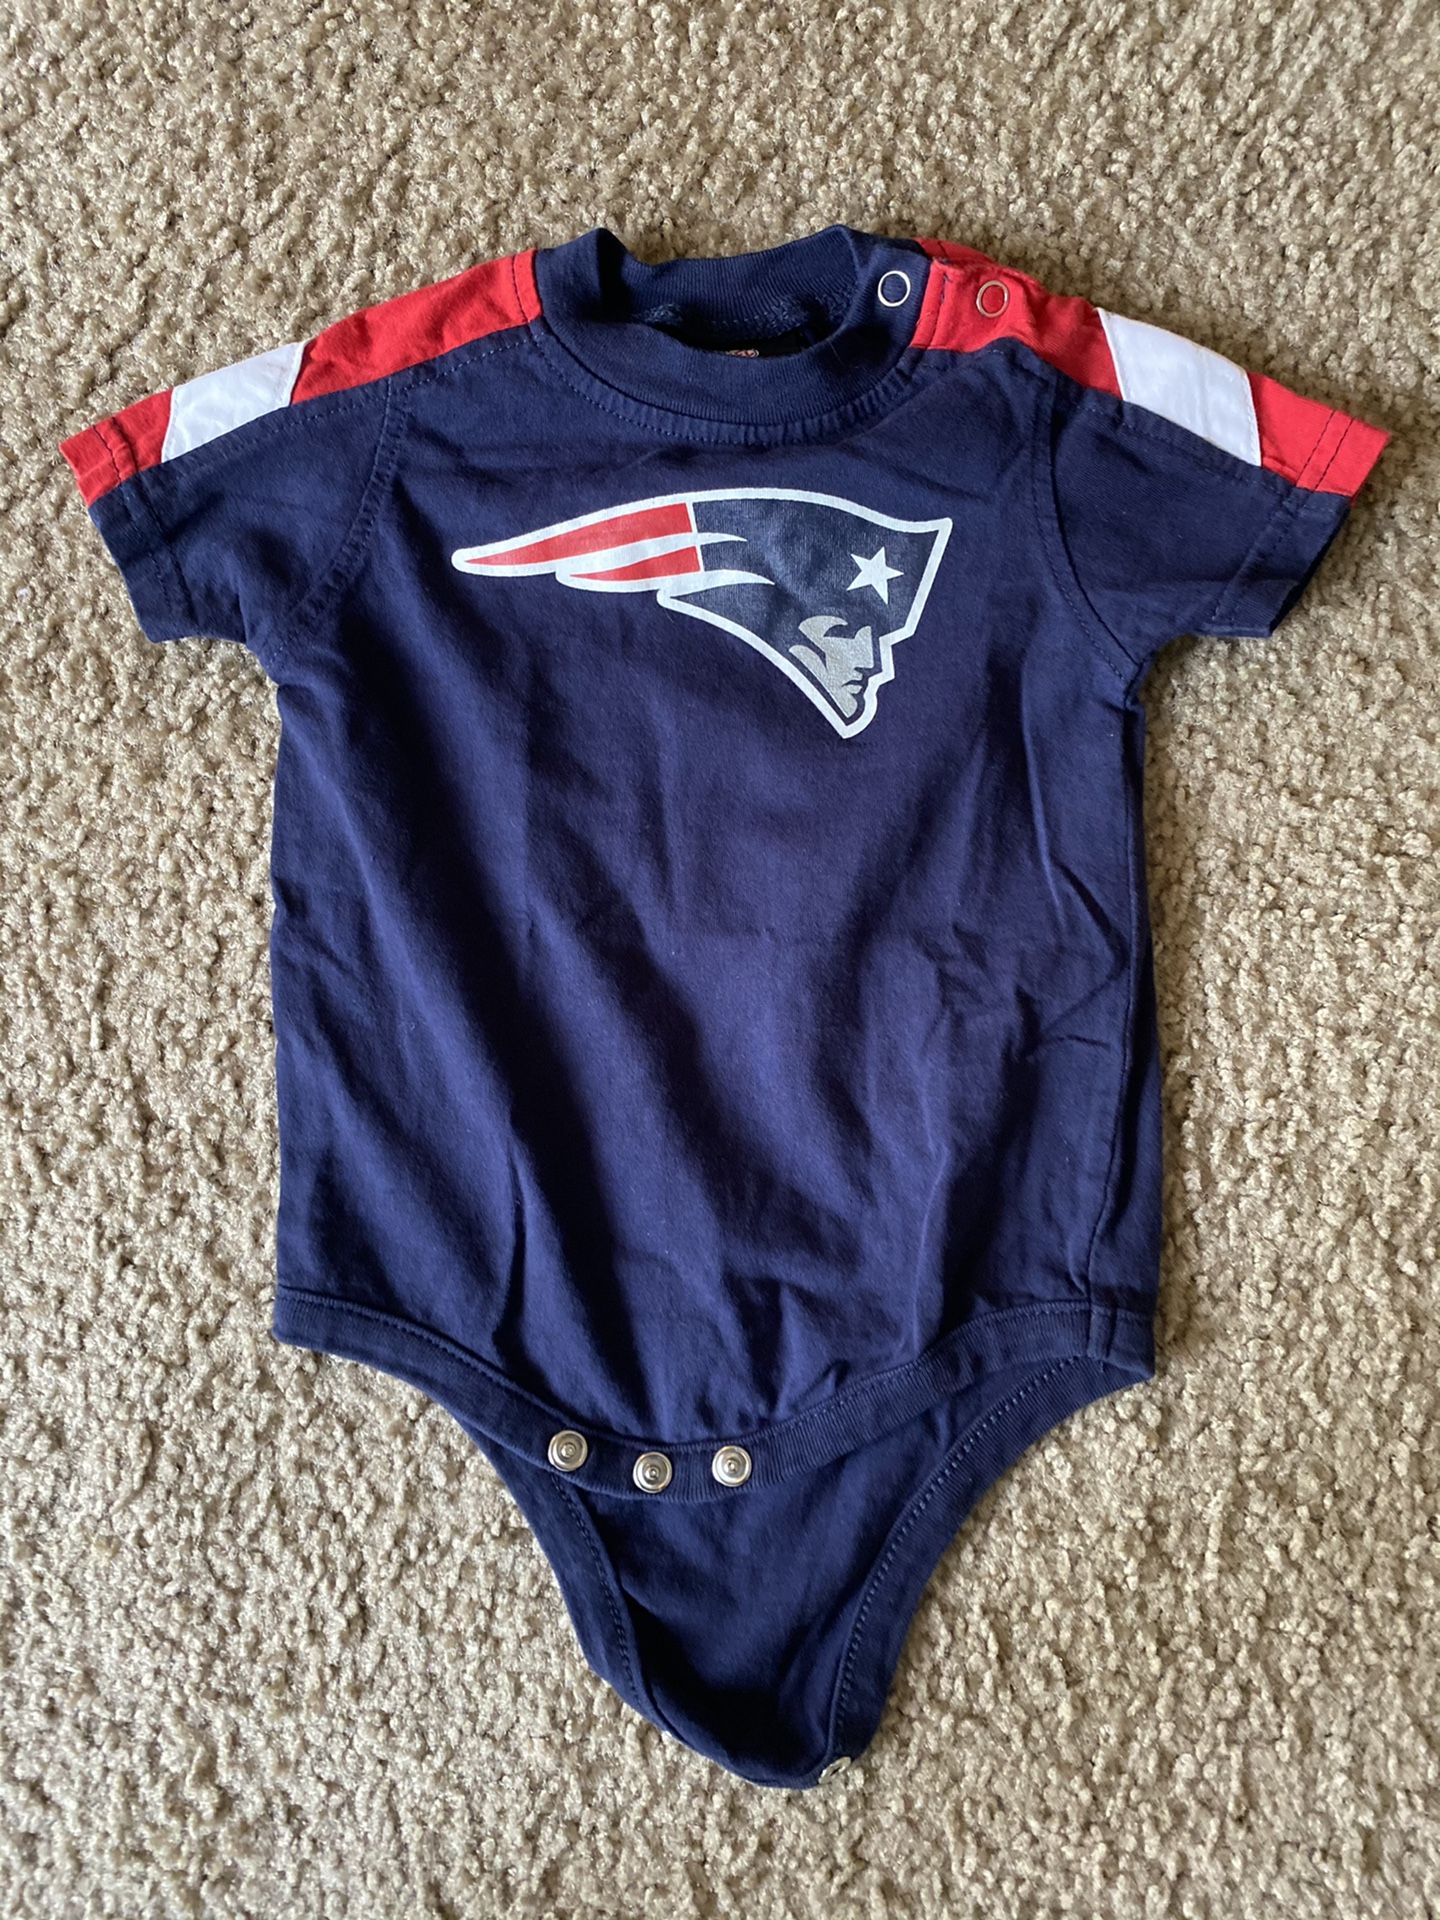 Official NFL appreal baby Onesie Patriots